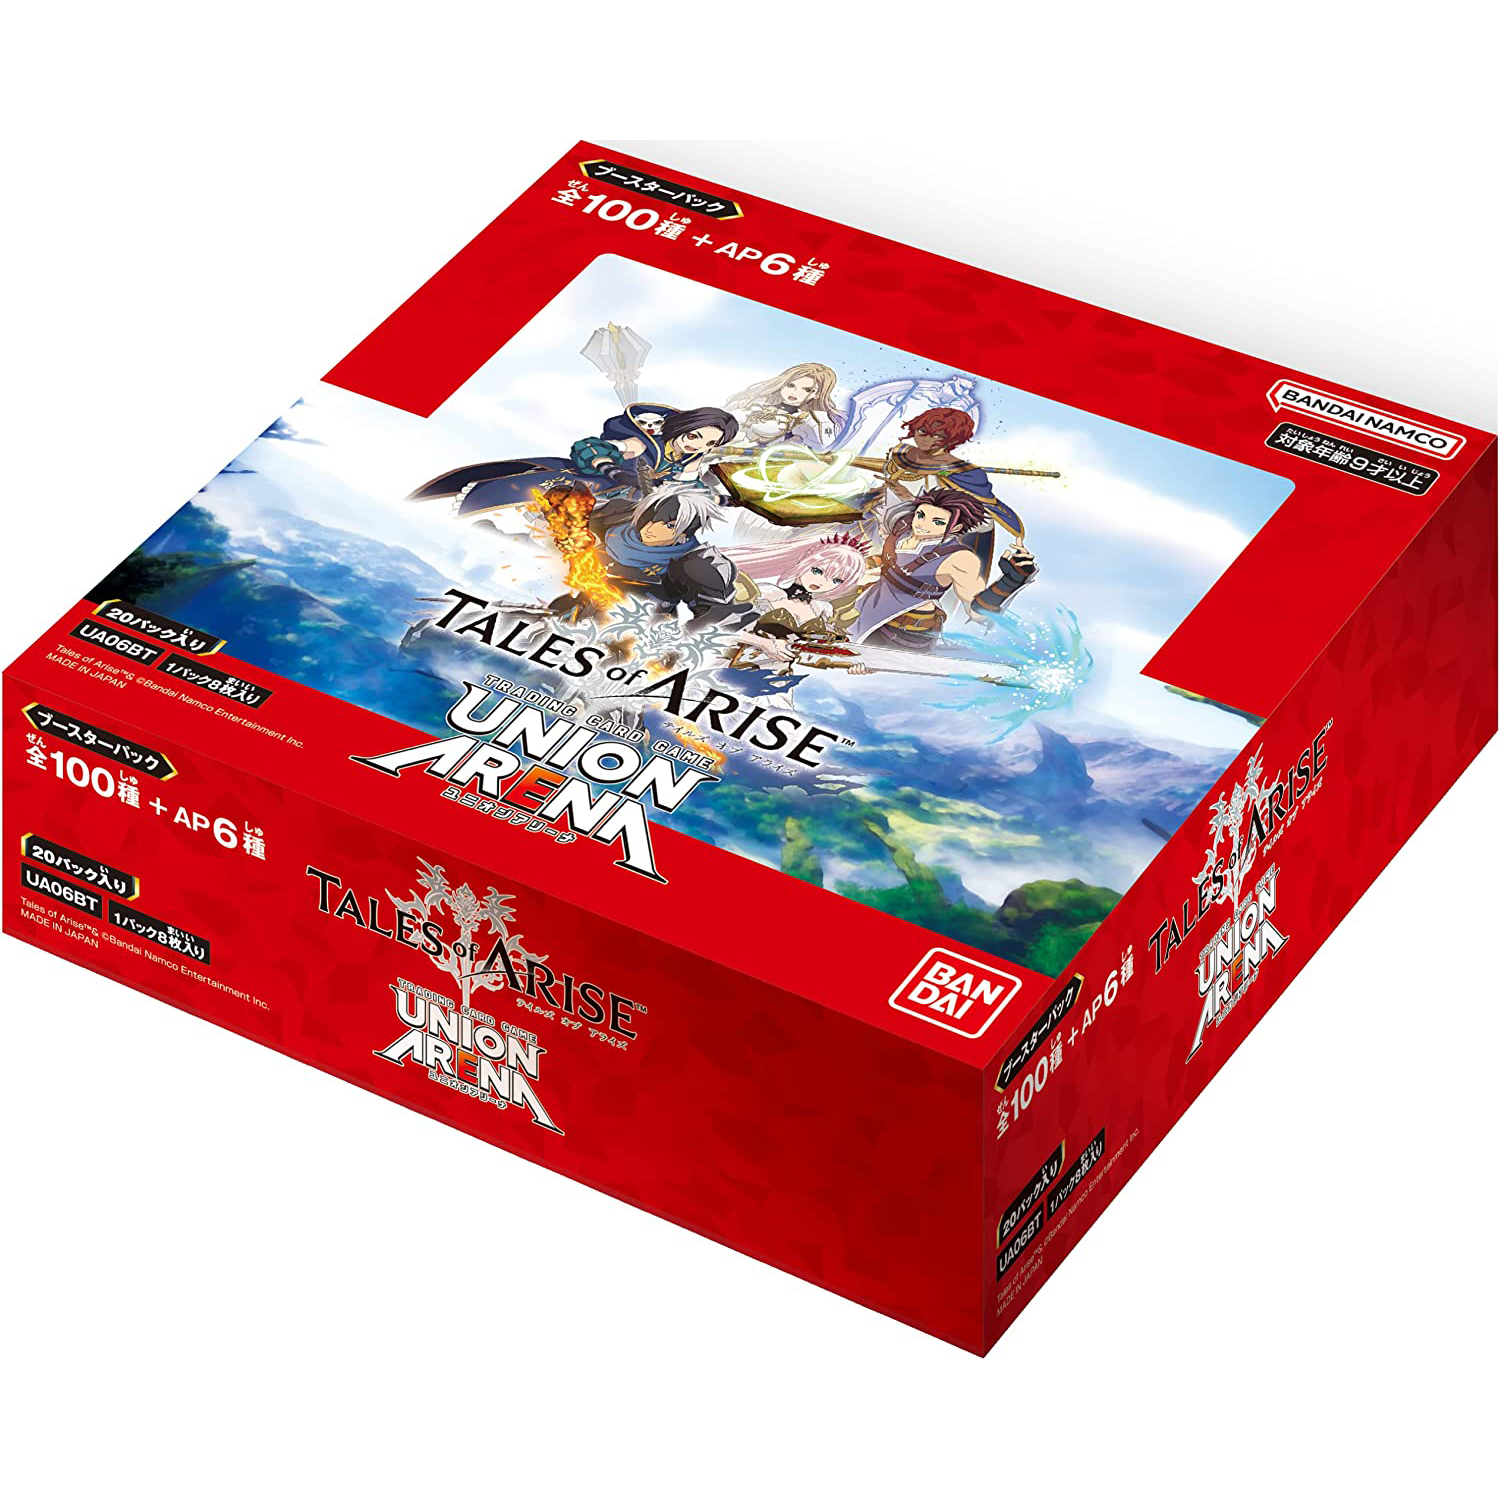 TRADING CARD GAME UNION ARENA [UA06BT] TALES of ARISE - Box